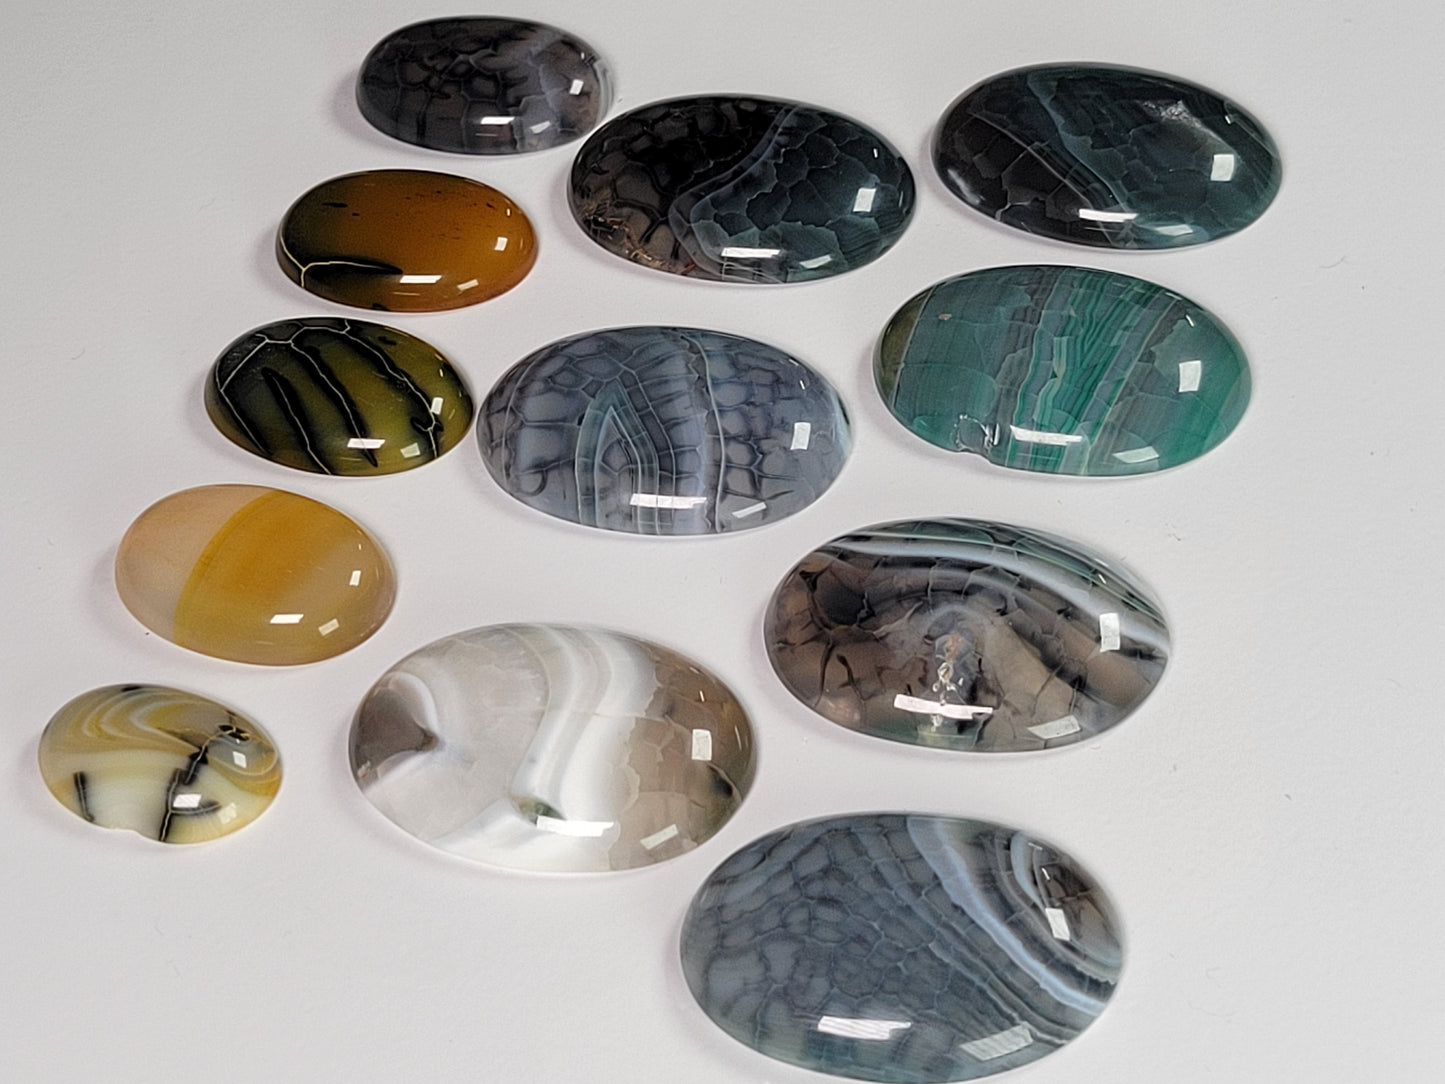 Dragons Vein Agate Cabochon - You choose